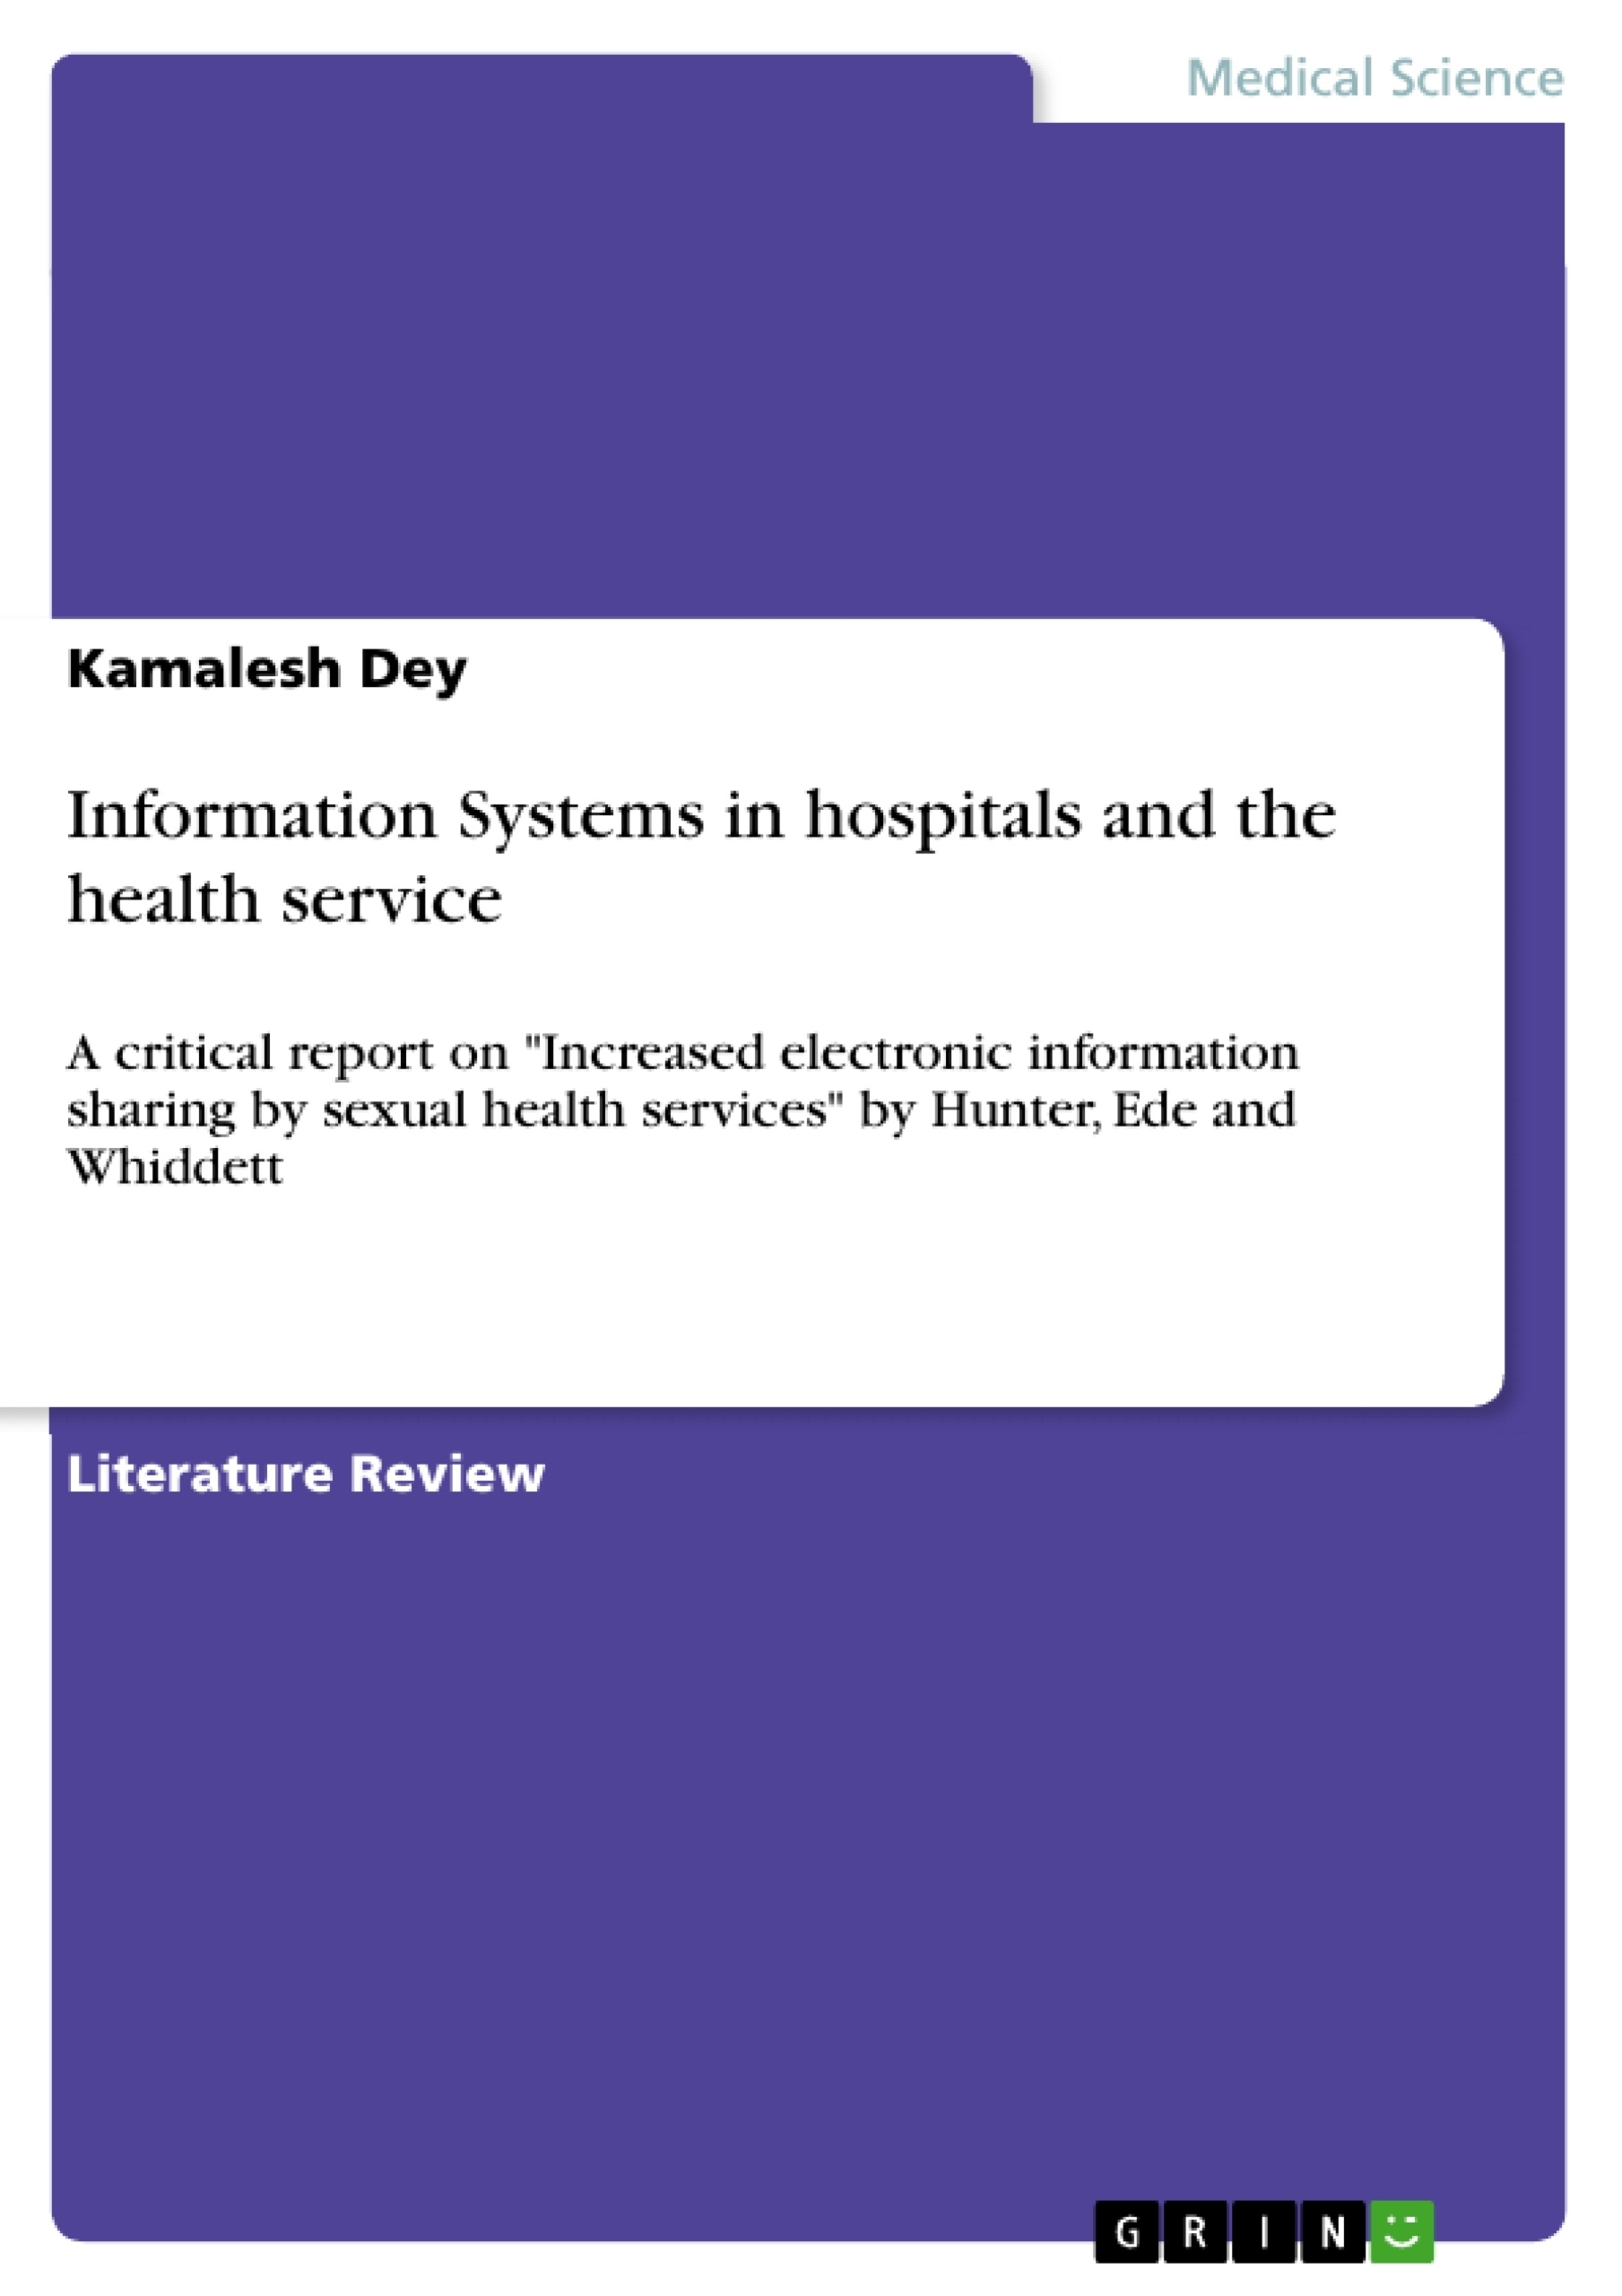 Título: Information Systems in hospitals and the health service